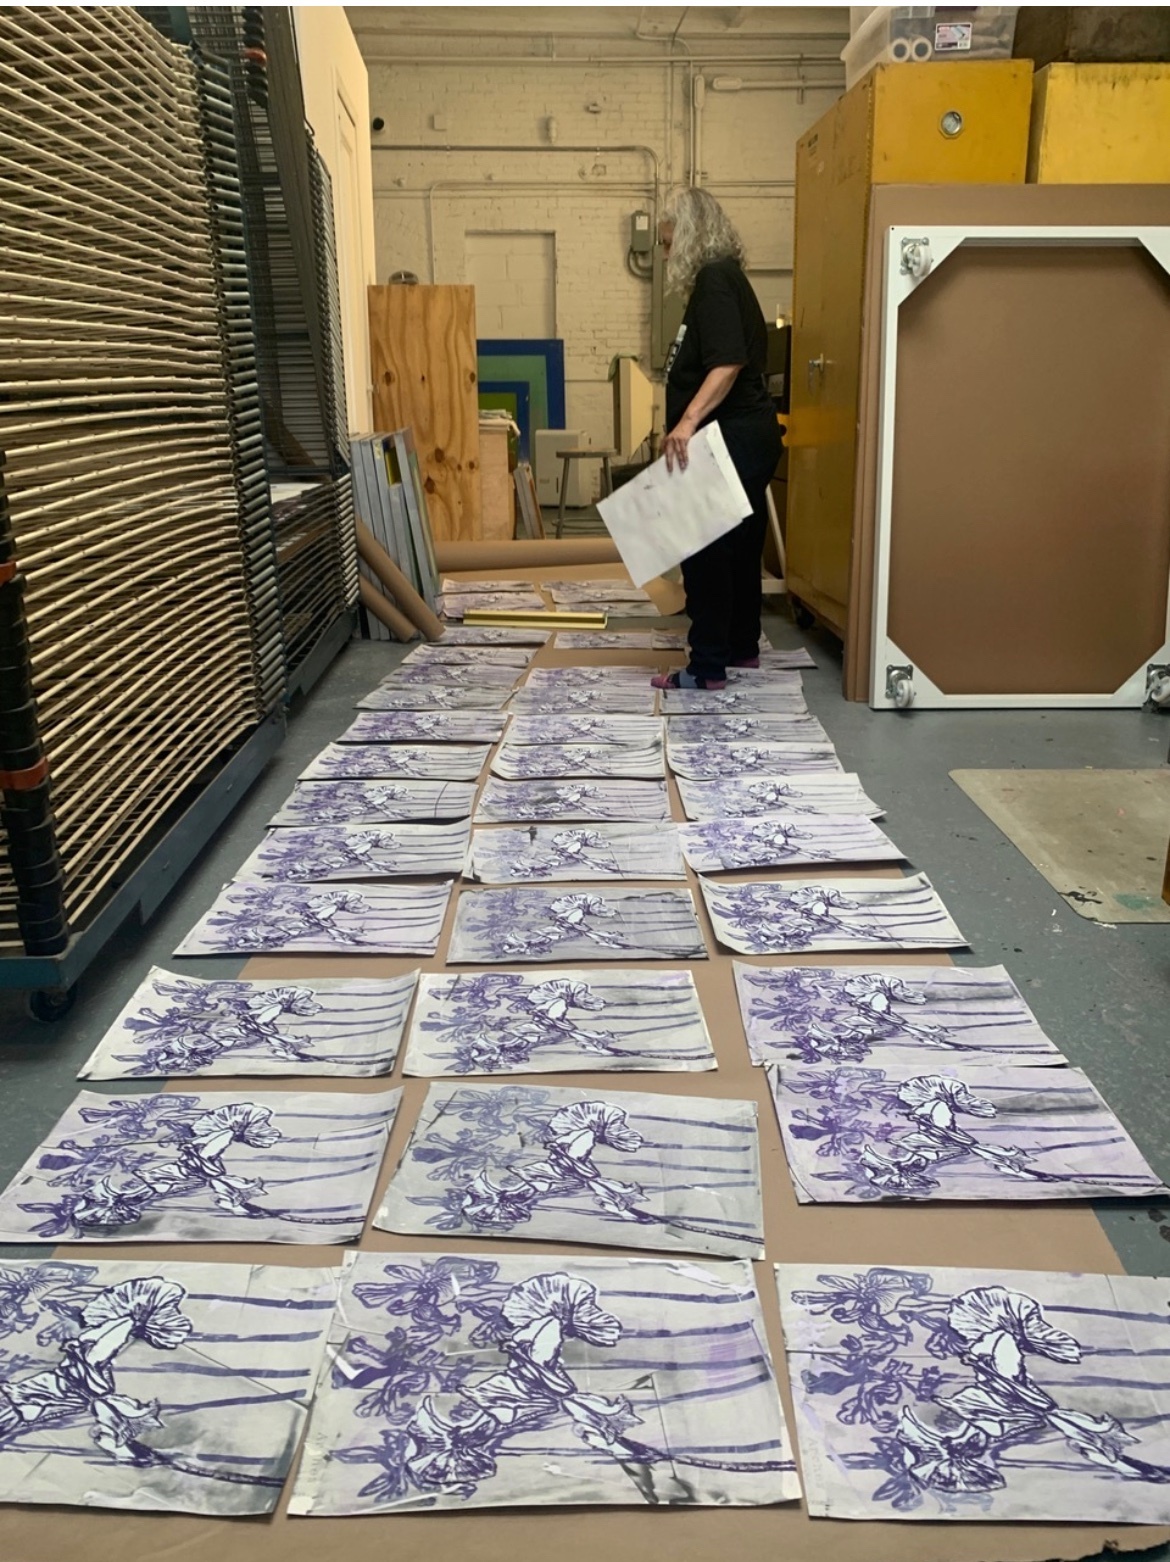 Production of “Flowers for TZK“ at Kingsland Printing, Brooklyn, NY, Amy Sillman and Sara Gates, 2020